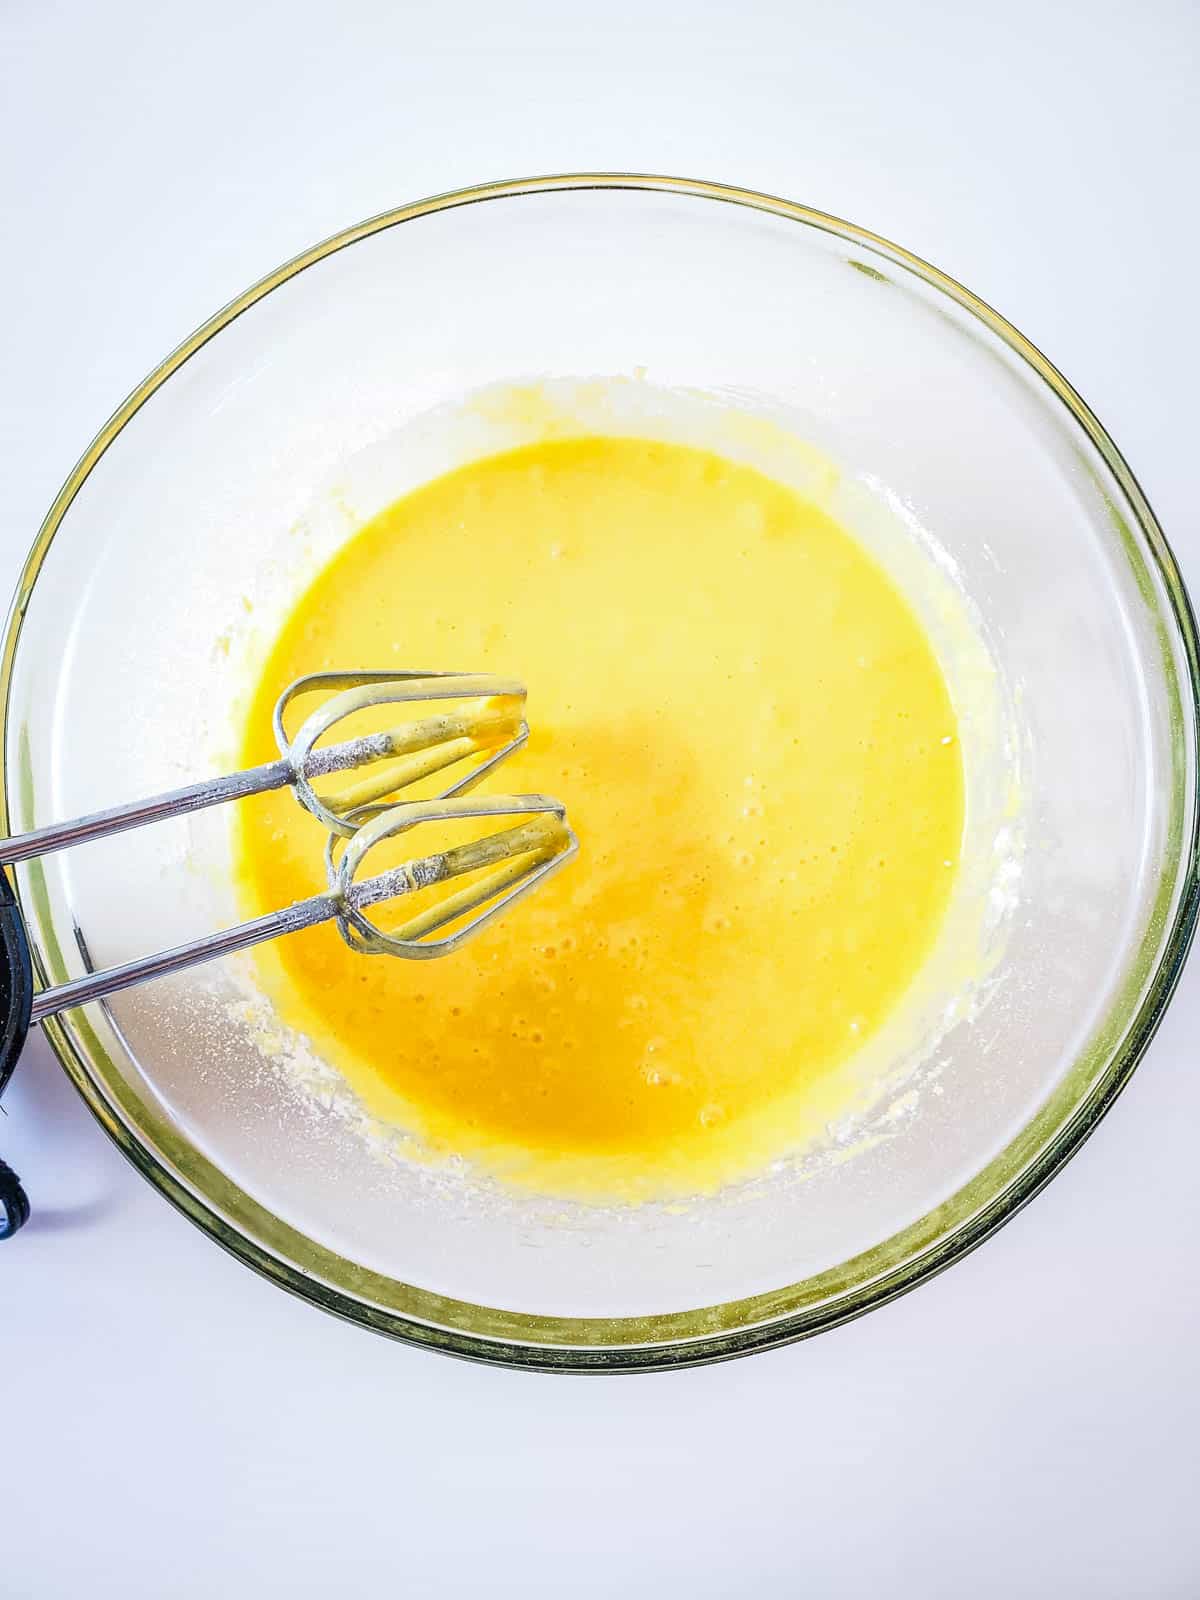 A glass bowl on a counter with boxed cake mix batter and hand held mixer whisks.